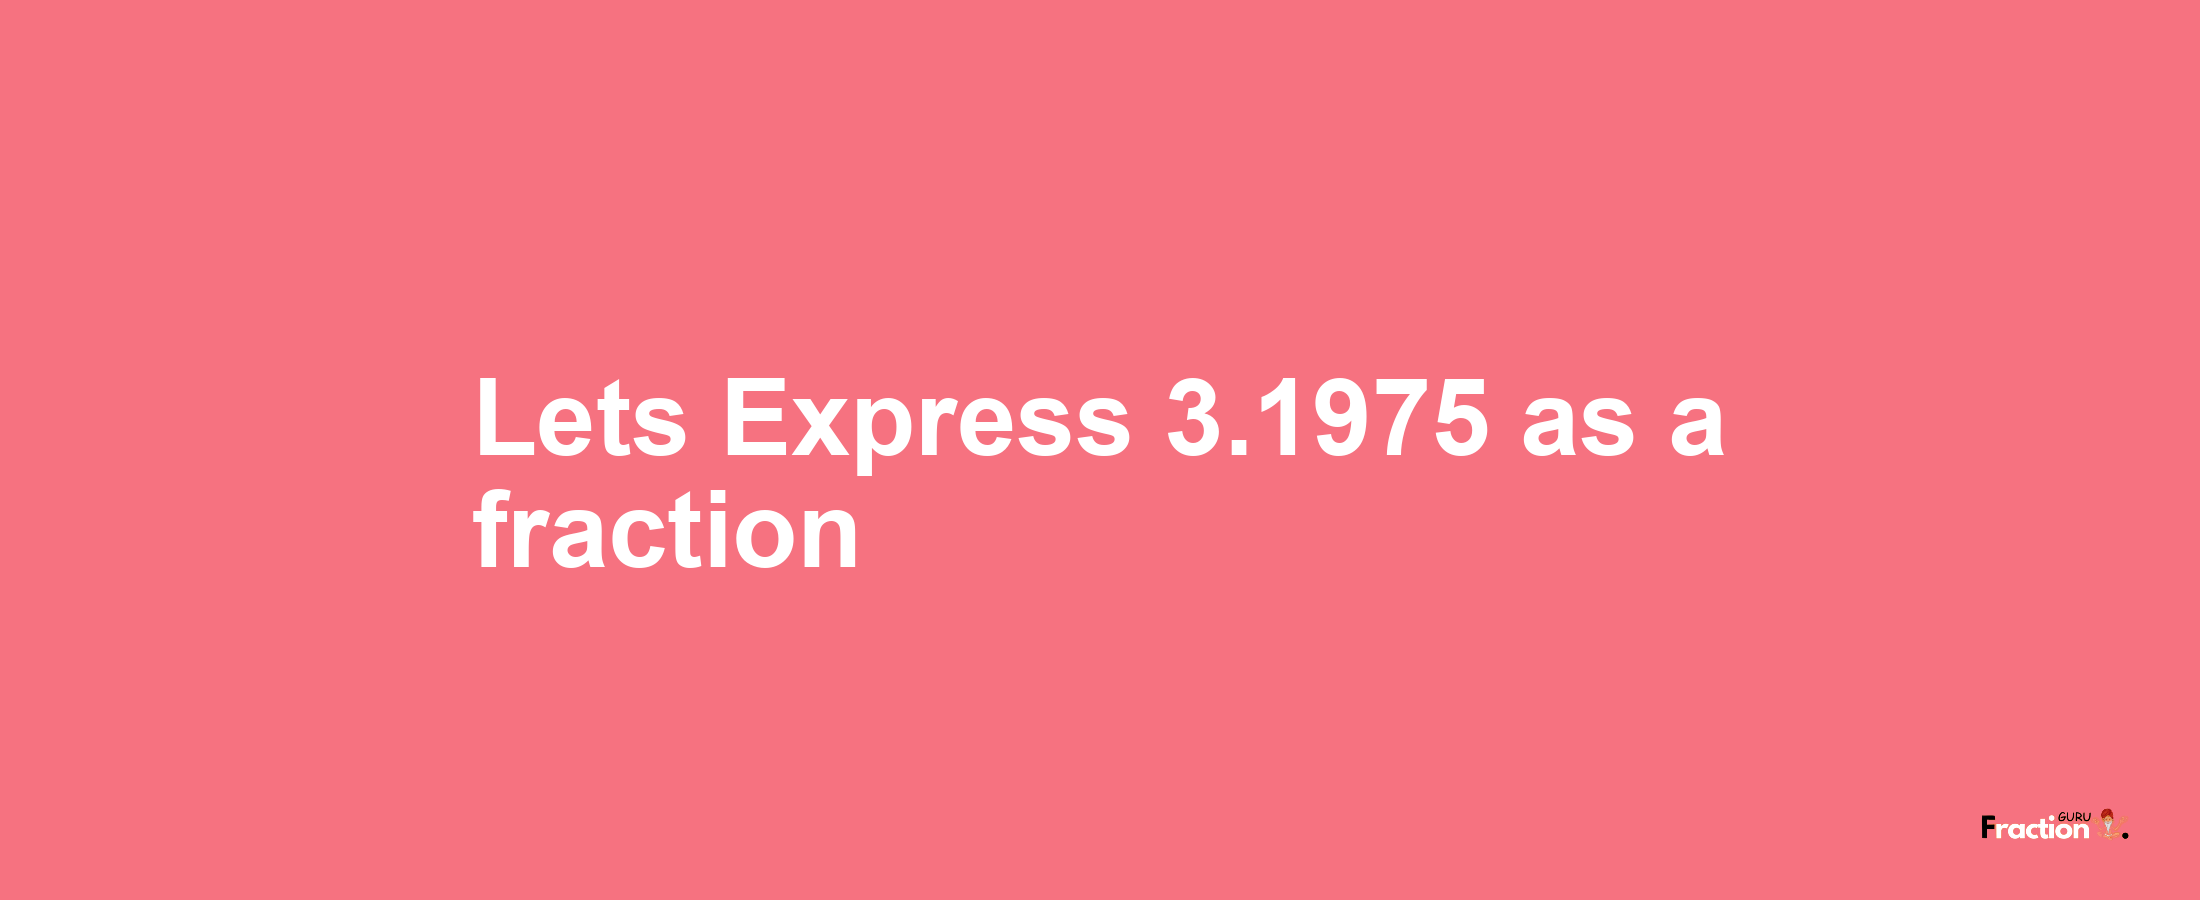 Lets Express 3.1975 as afraction